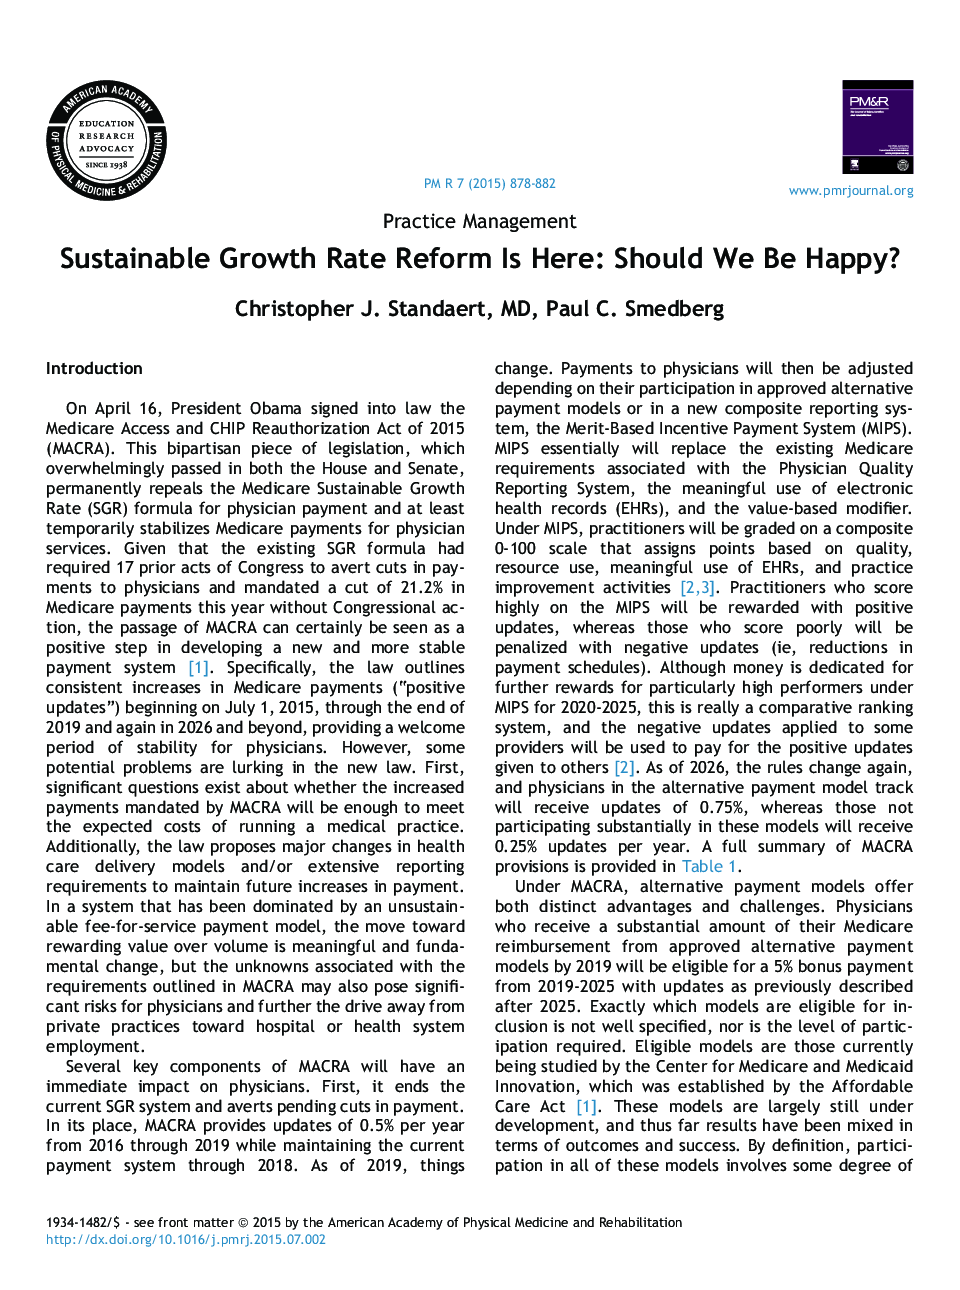 Sustainable Growth Rate Reform Is Here: Should We Be Happy?